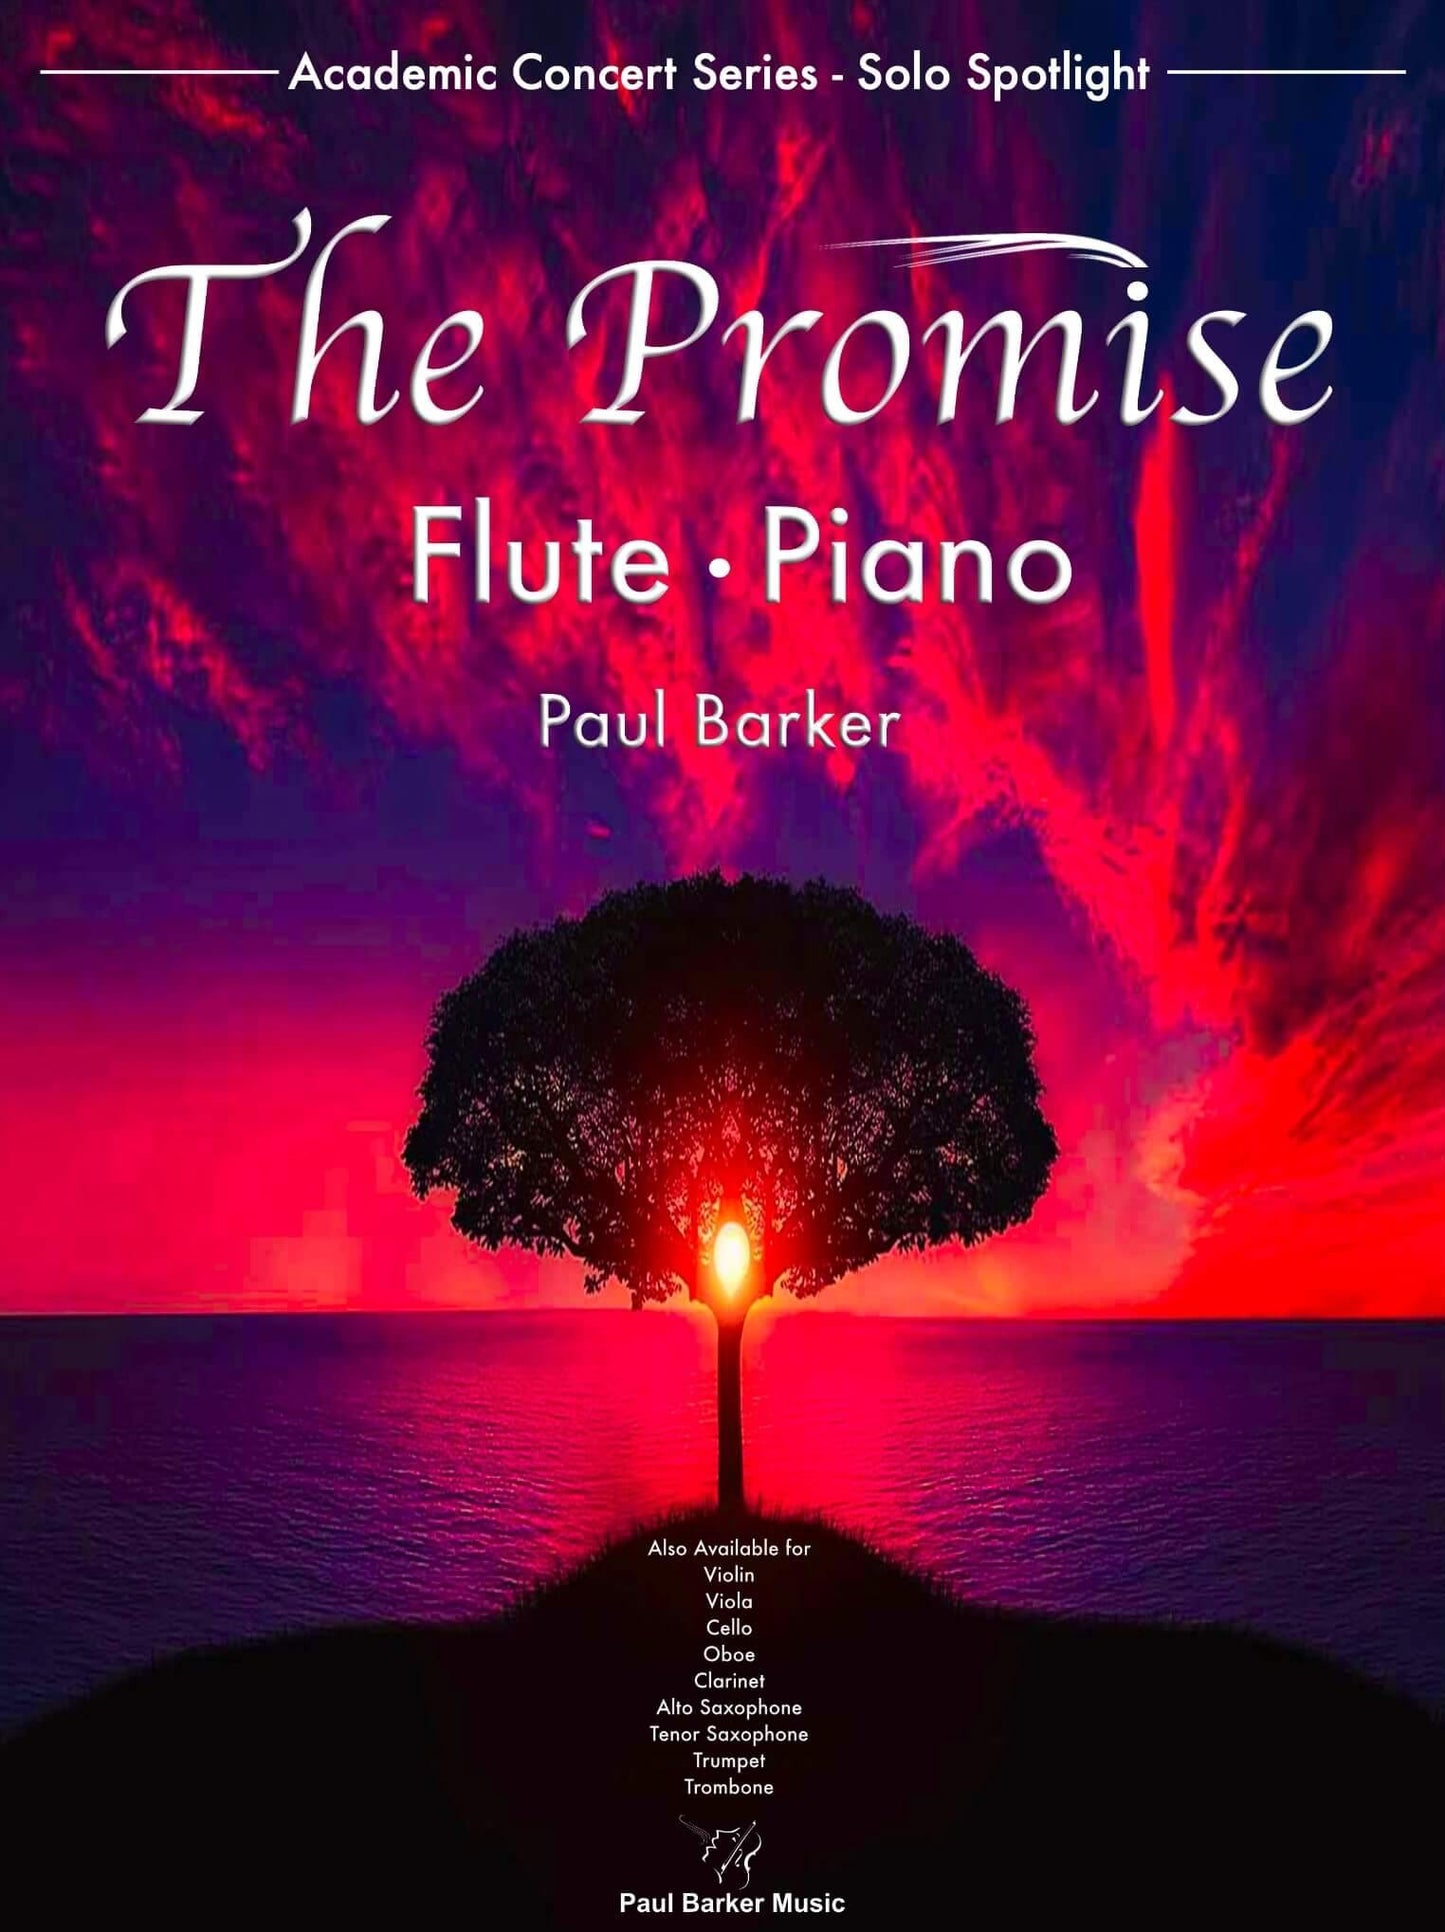 The Promise [Flute & Piano] - Paul Barker Music 